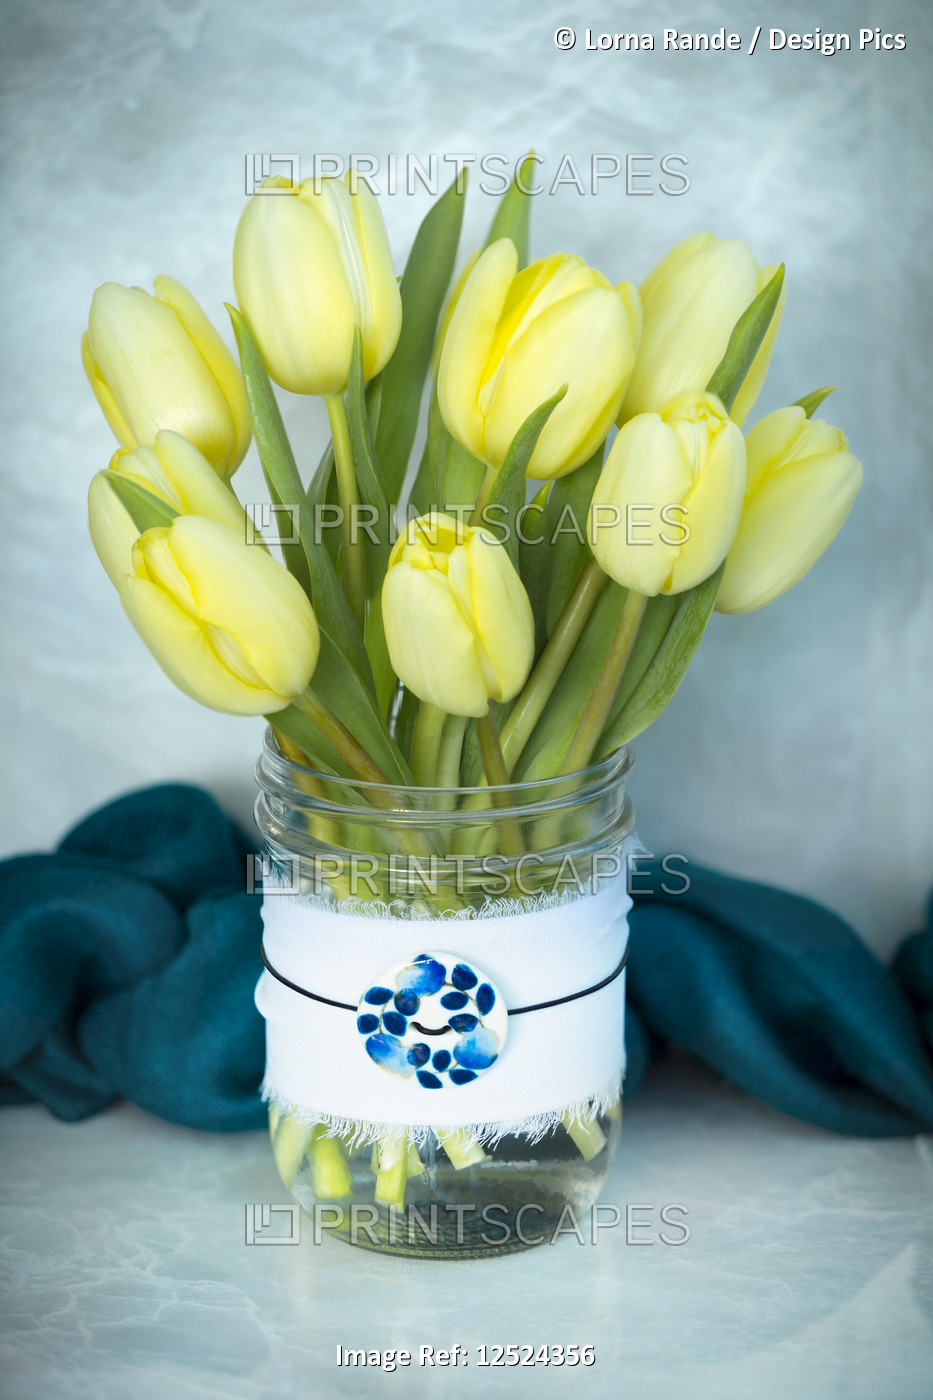 Cut tulips in a decorative glass jar with a pendant